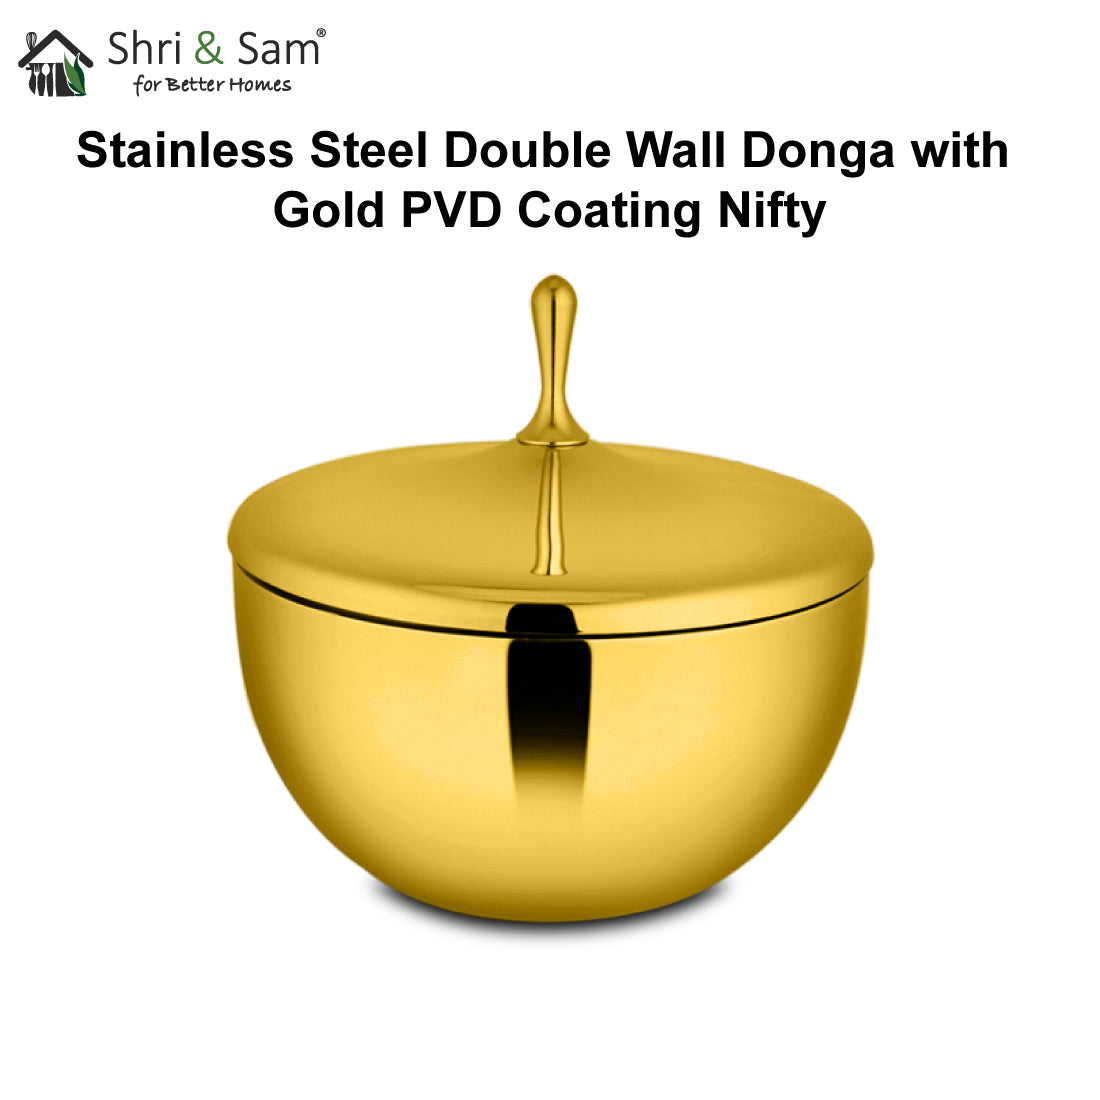 Stainless Steel Double Wall Donga with Gold PVD Coating Nifty